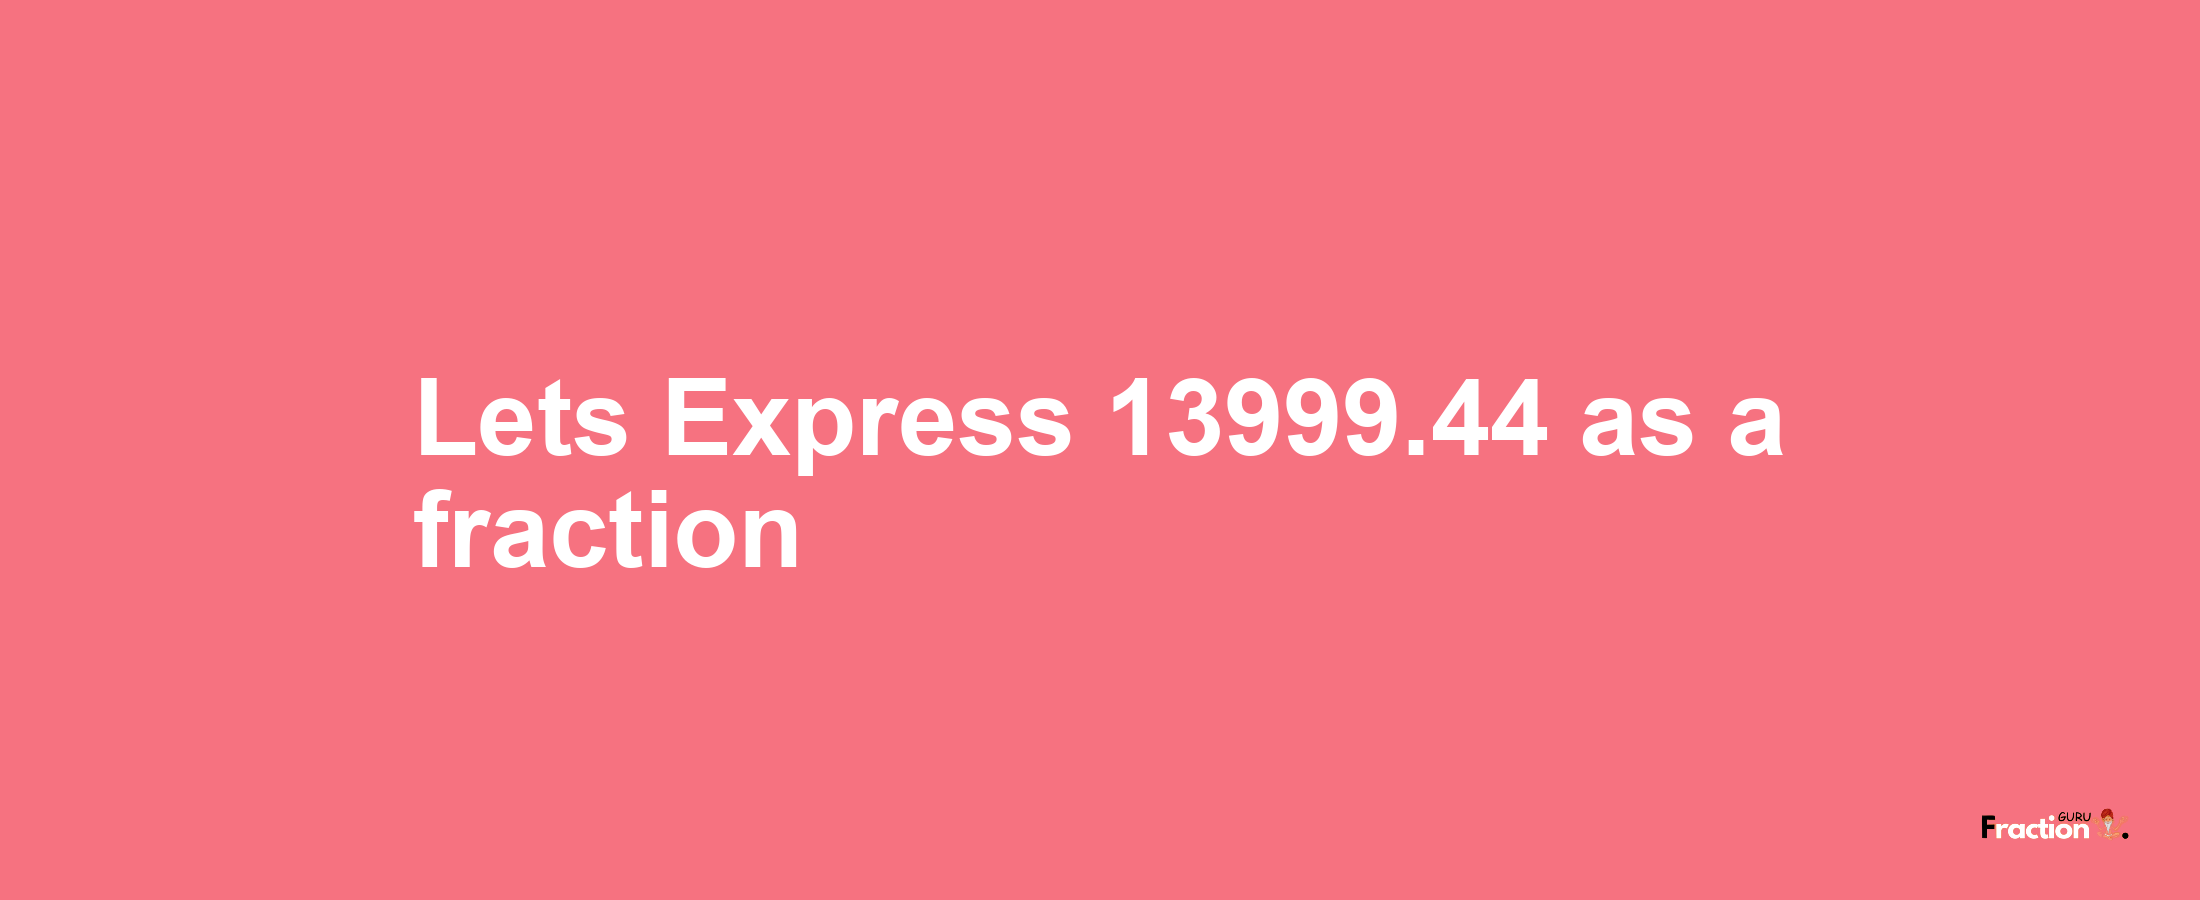 Lets Express 13999.44 as afraction